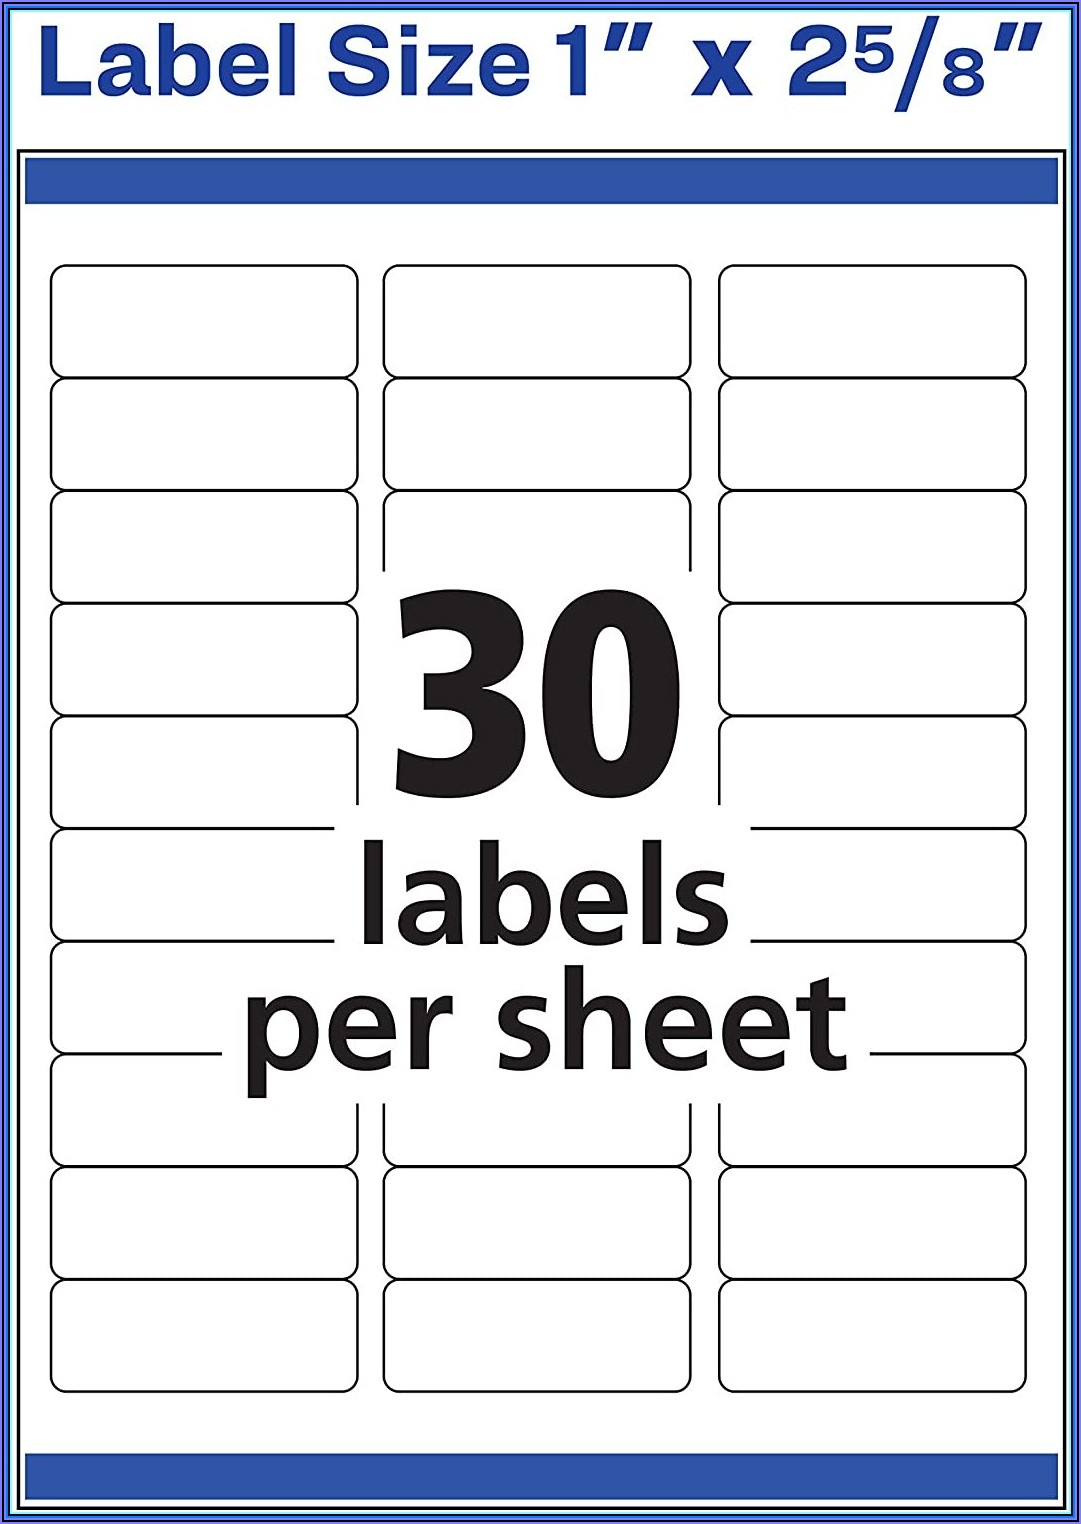 Printing Sticky Labels Template